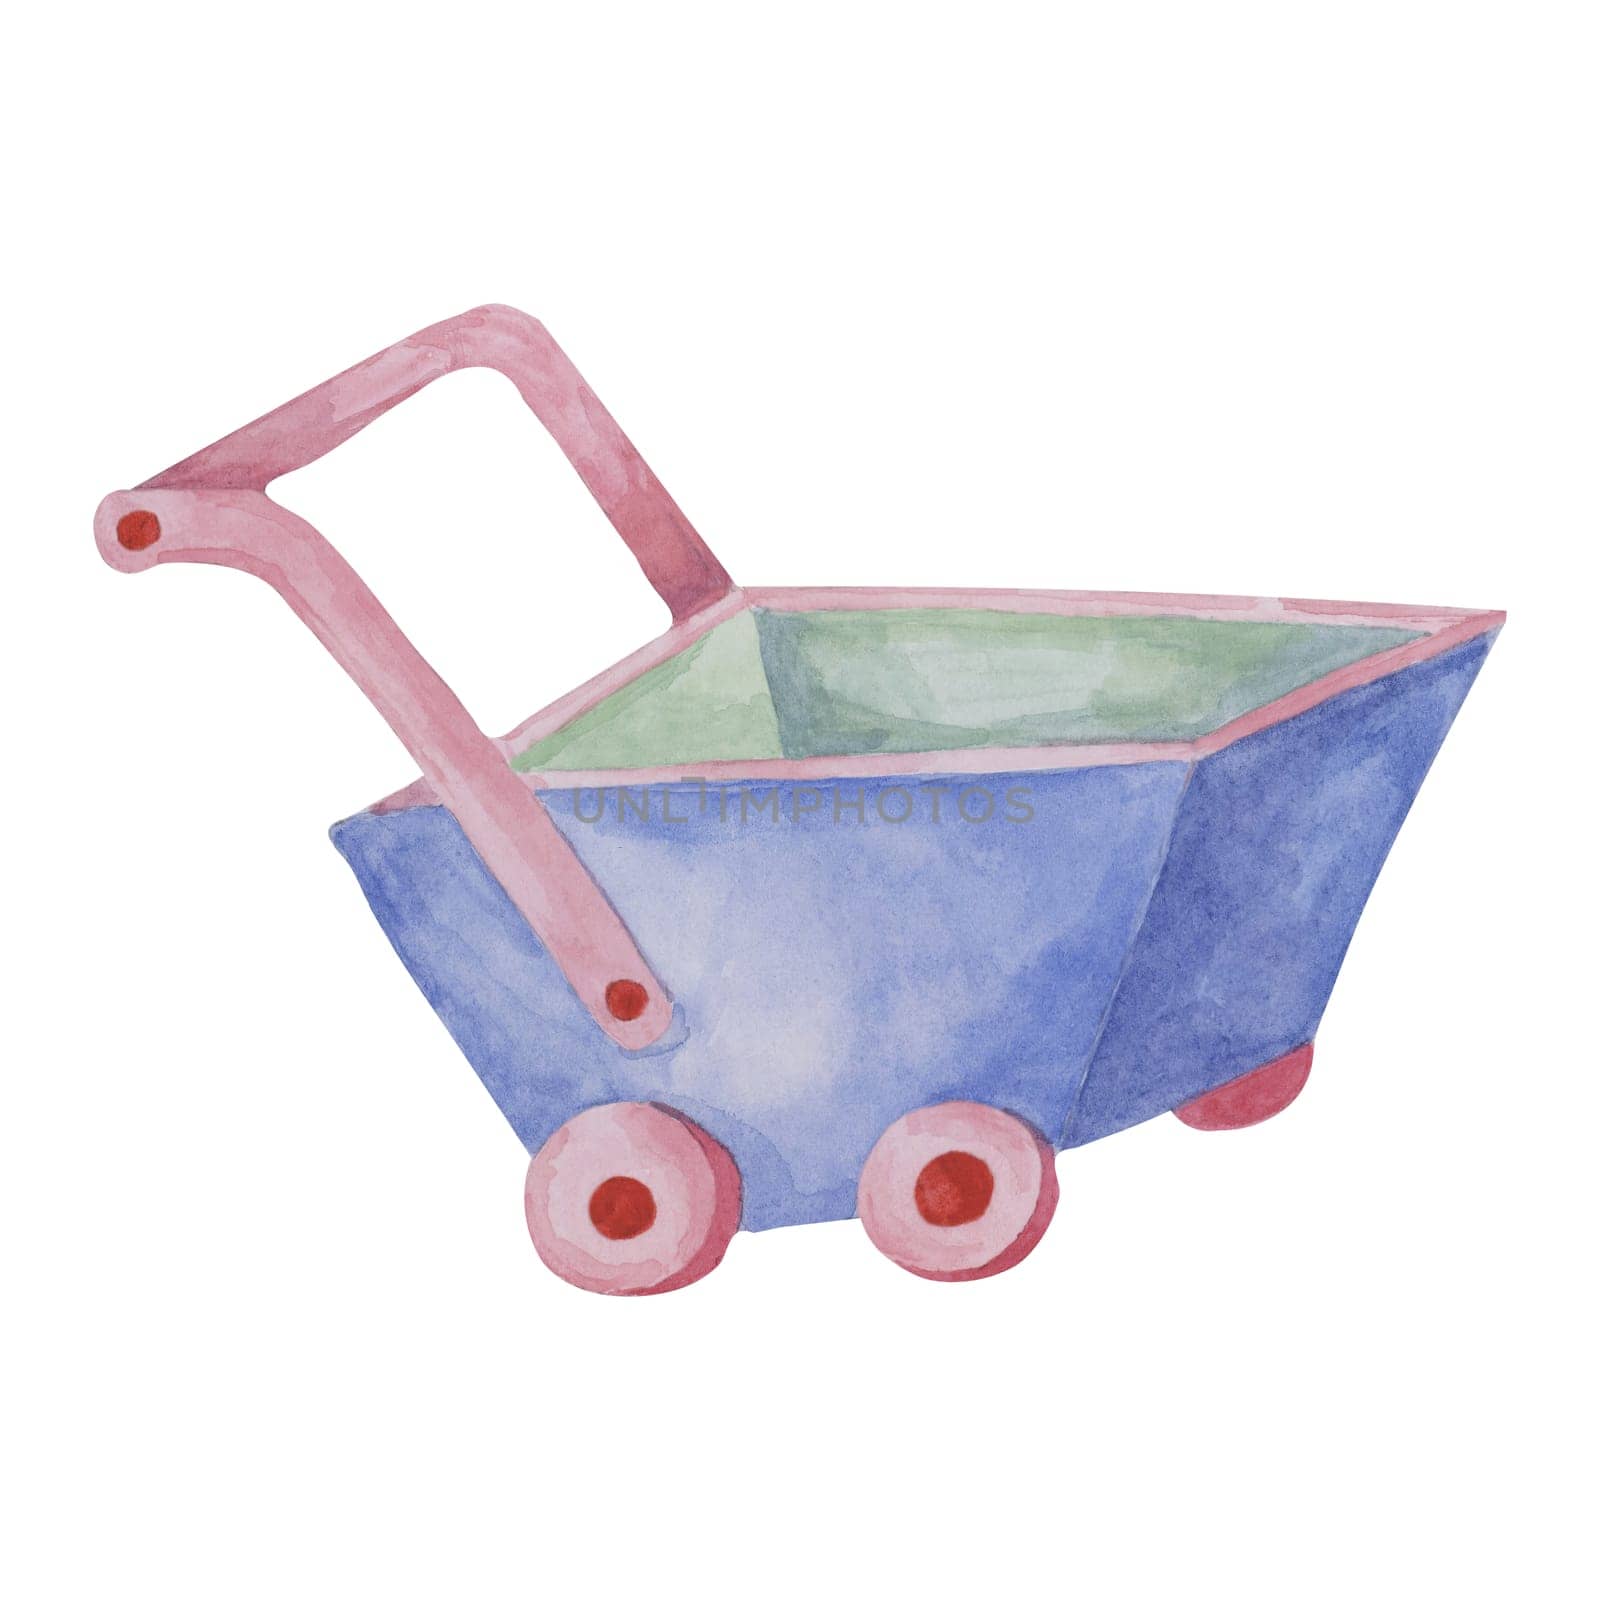 Wheelbarrow rustic toy. Wooden cart, eco play trolley clipart. Retro gardening watercolor illustration for kids party, stickers, invitations by Fofito